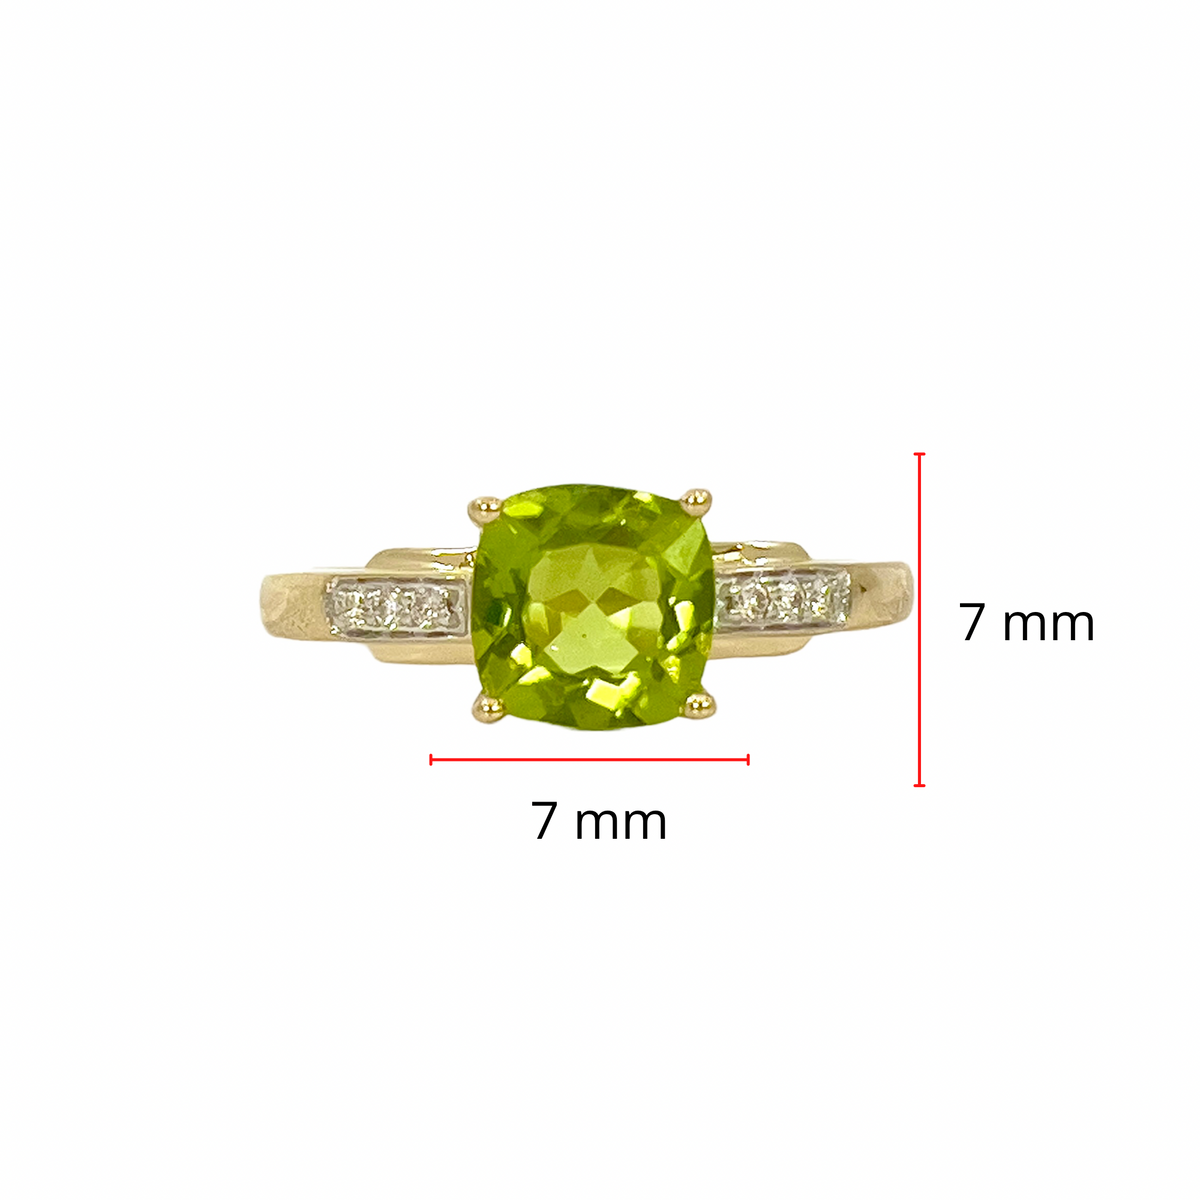 10K Yellow Gold 1.41cttw Peridot and 0.051cttw Diamond Ring - Size 7